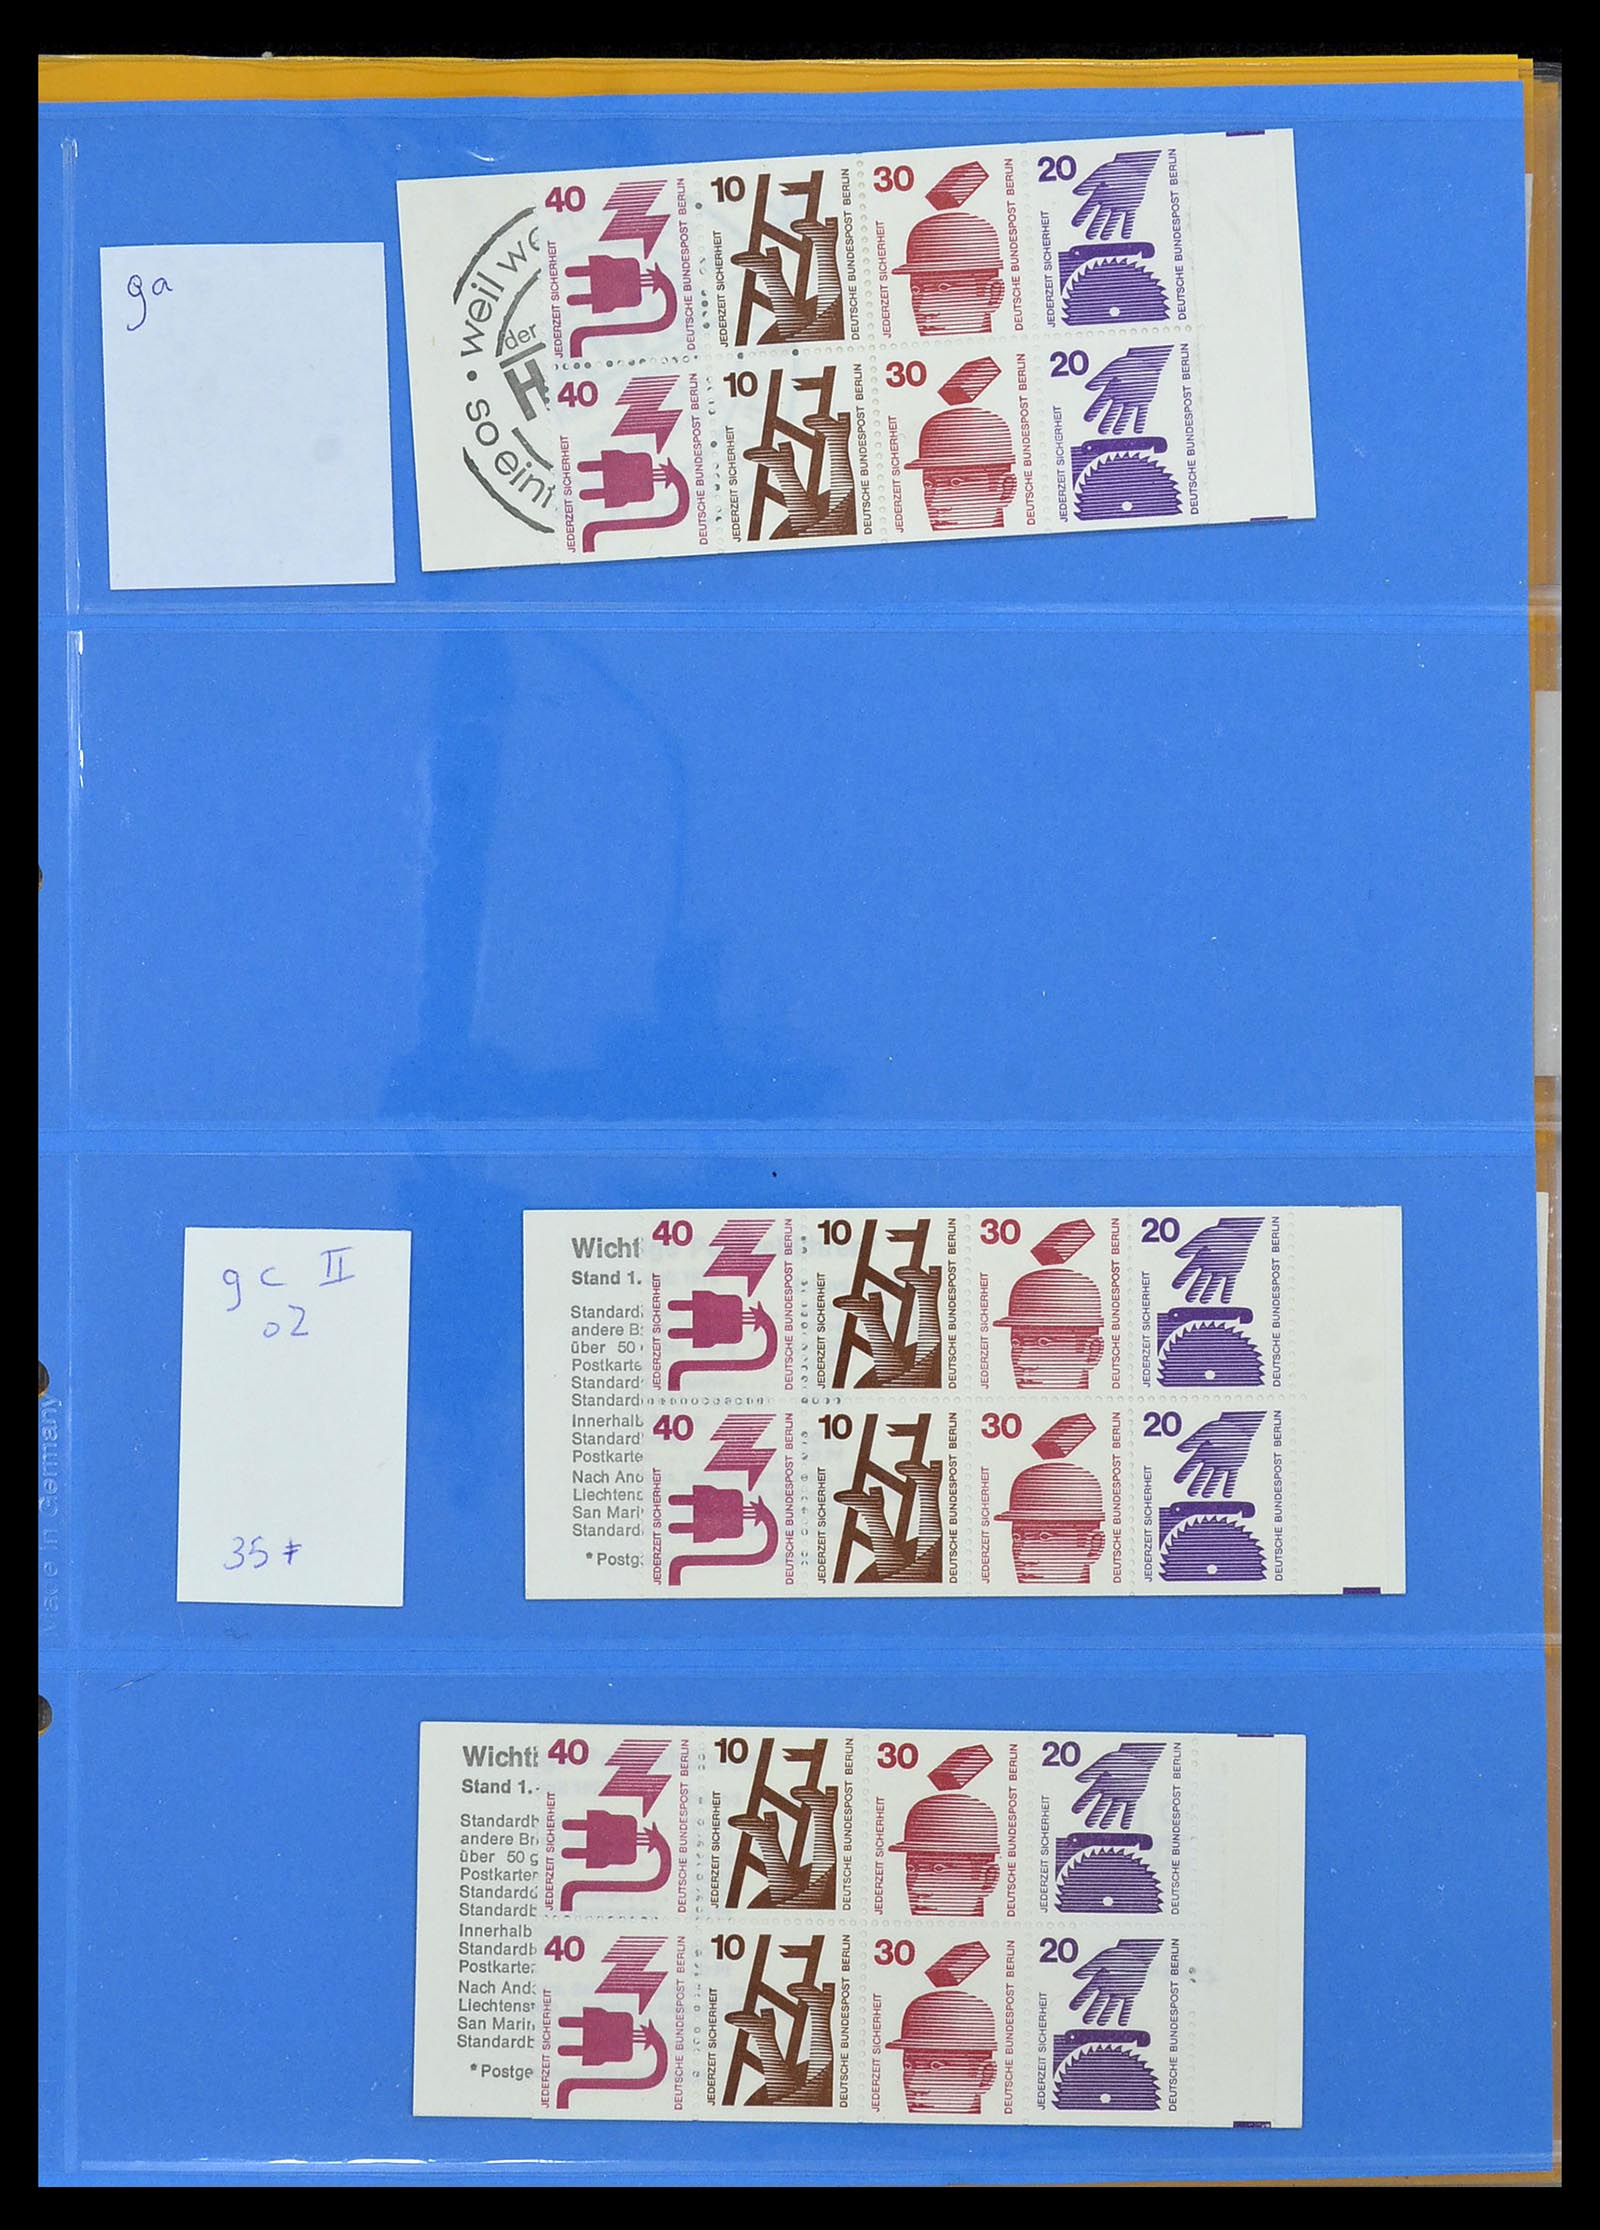 34495 072 - Stamp Collection 34495 Germany stamp booklets 1946-2006.